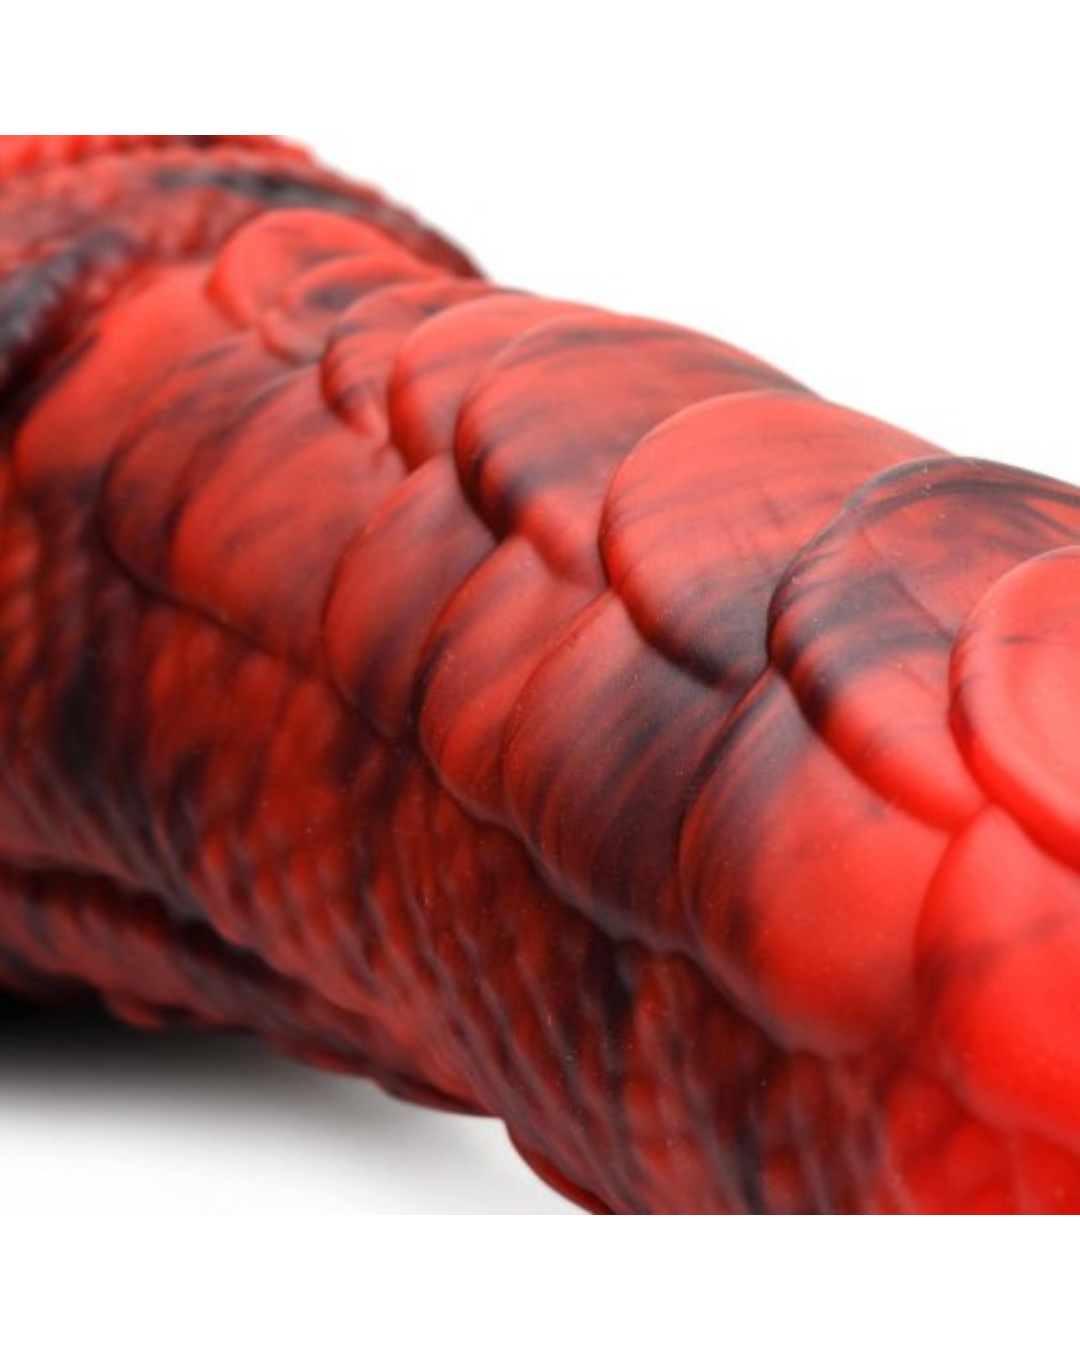 Fire Dragon Red Scaly Silicone Dildo close up on a white background